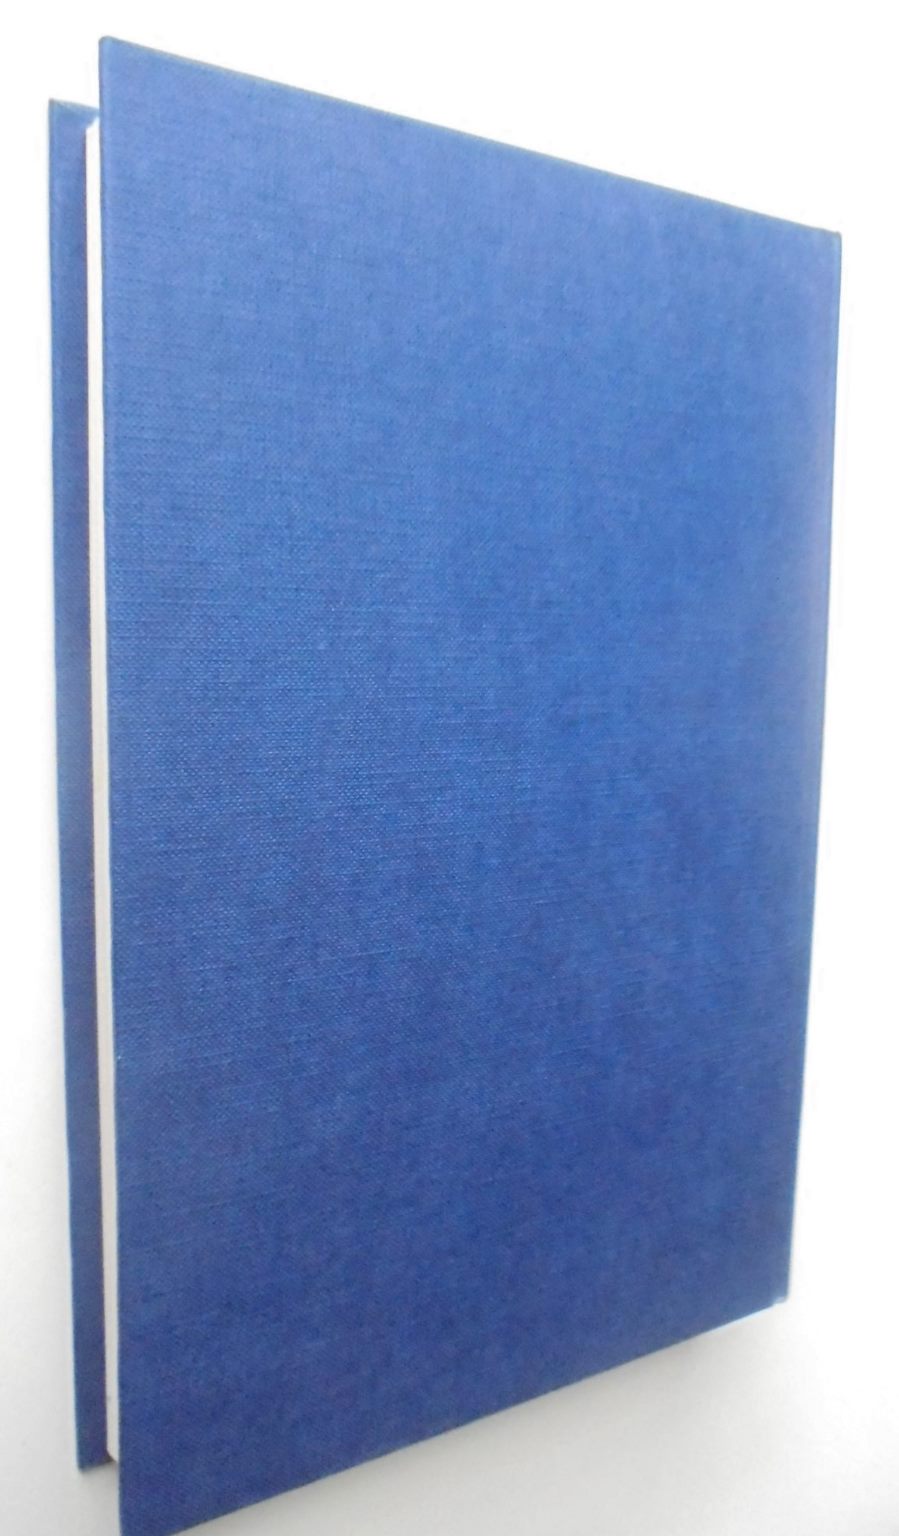 Everest Reconnaissance: The First Expedition of 1921 by Bury, Charles Howard; Mallory, George Leigh